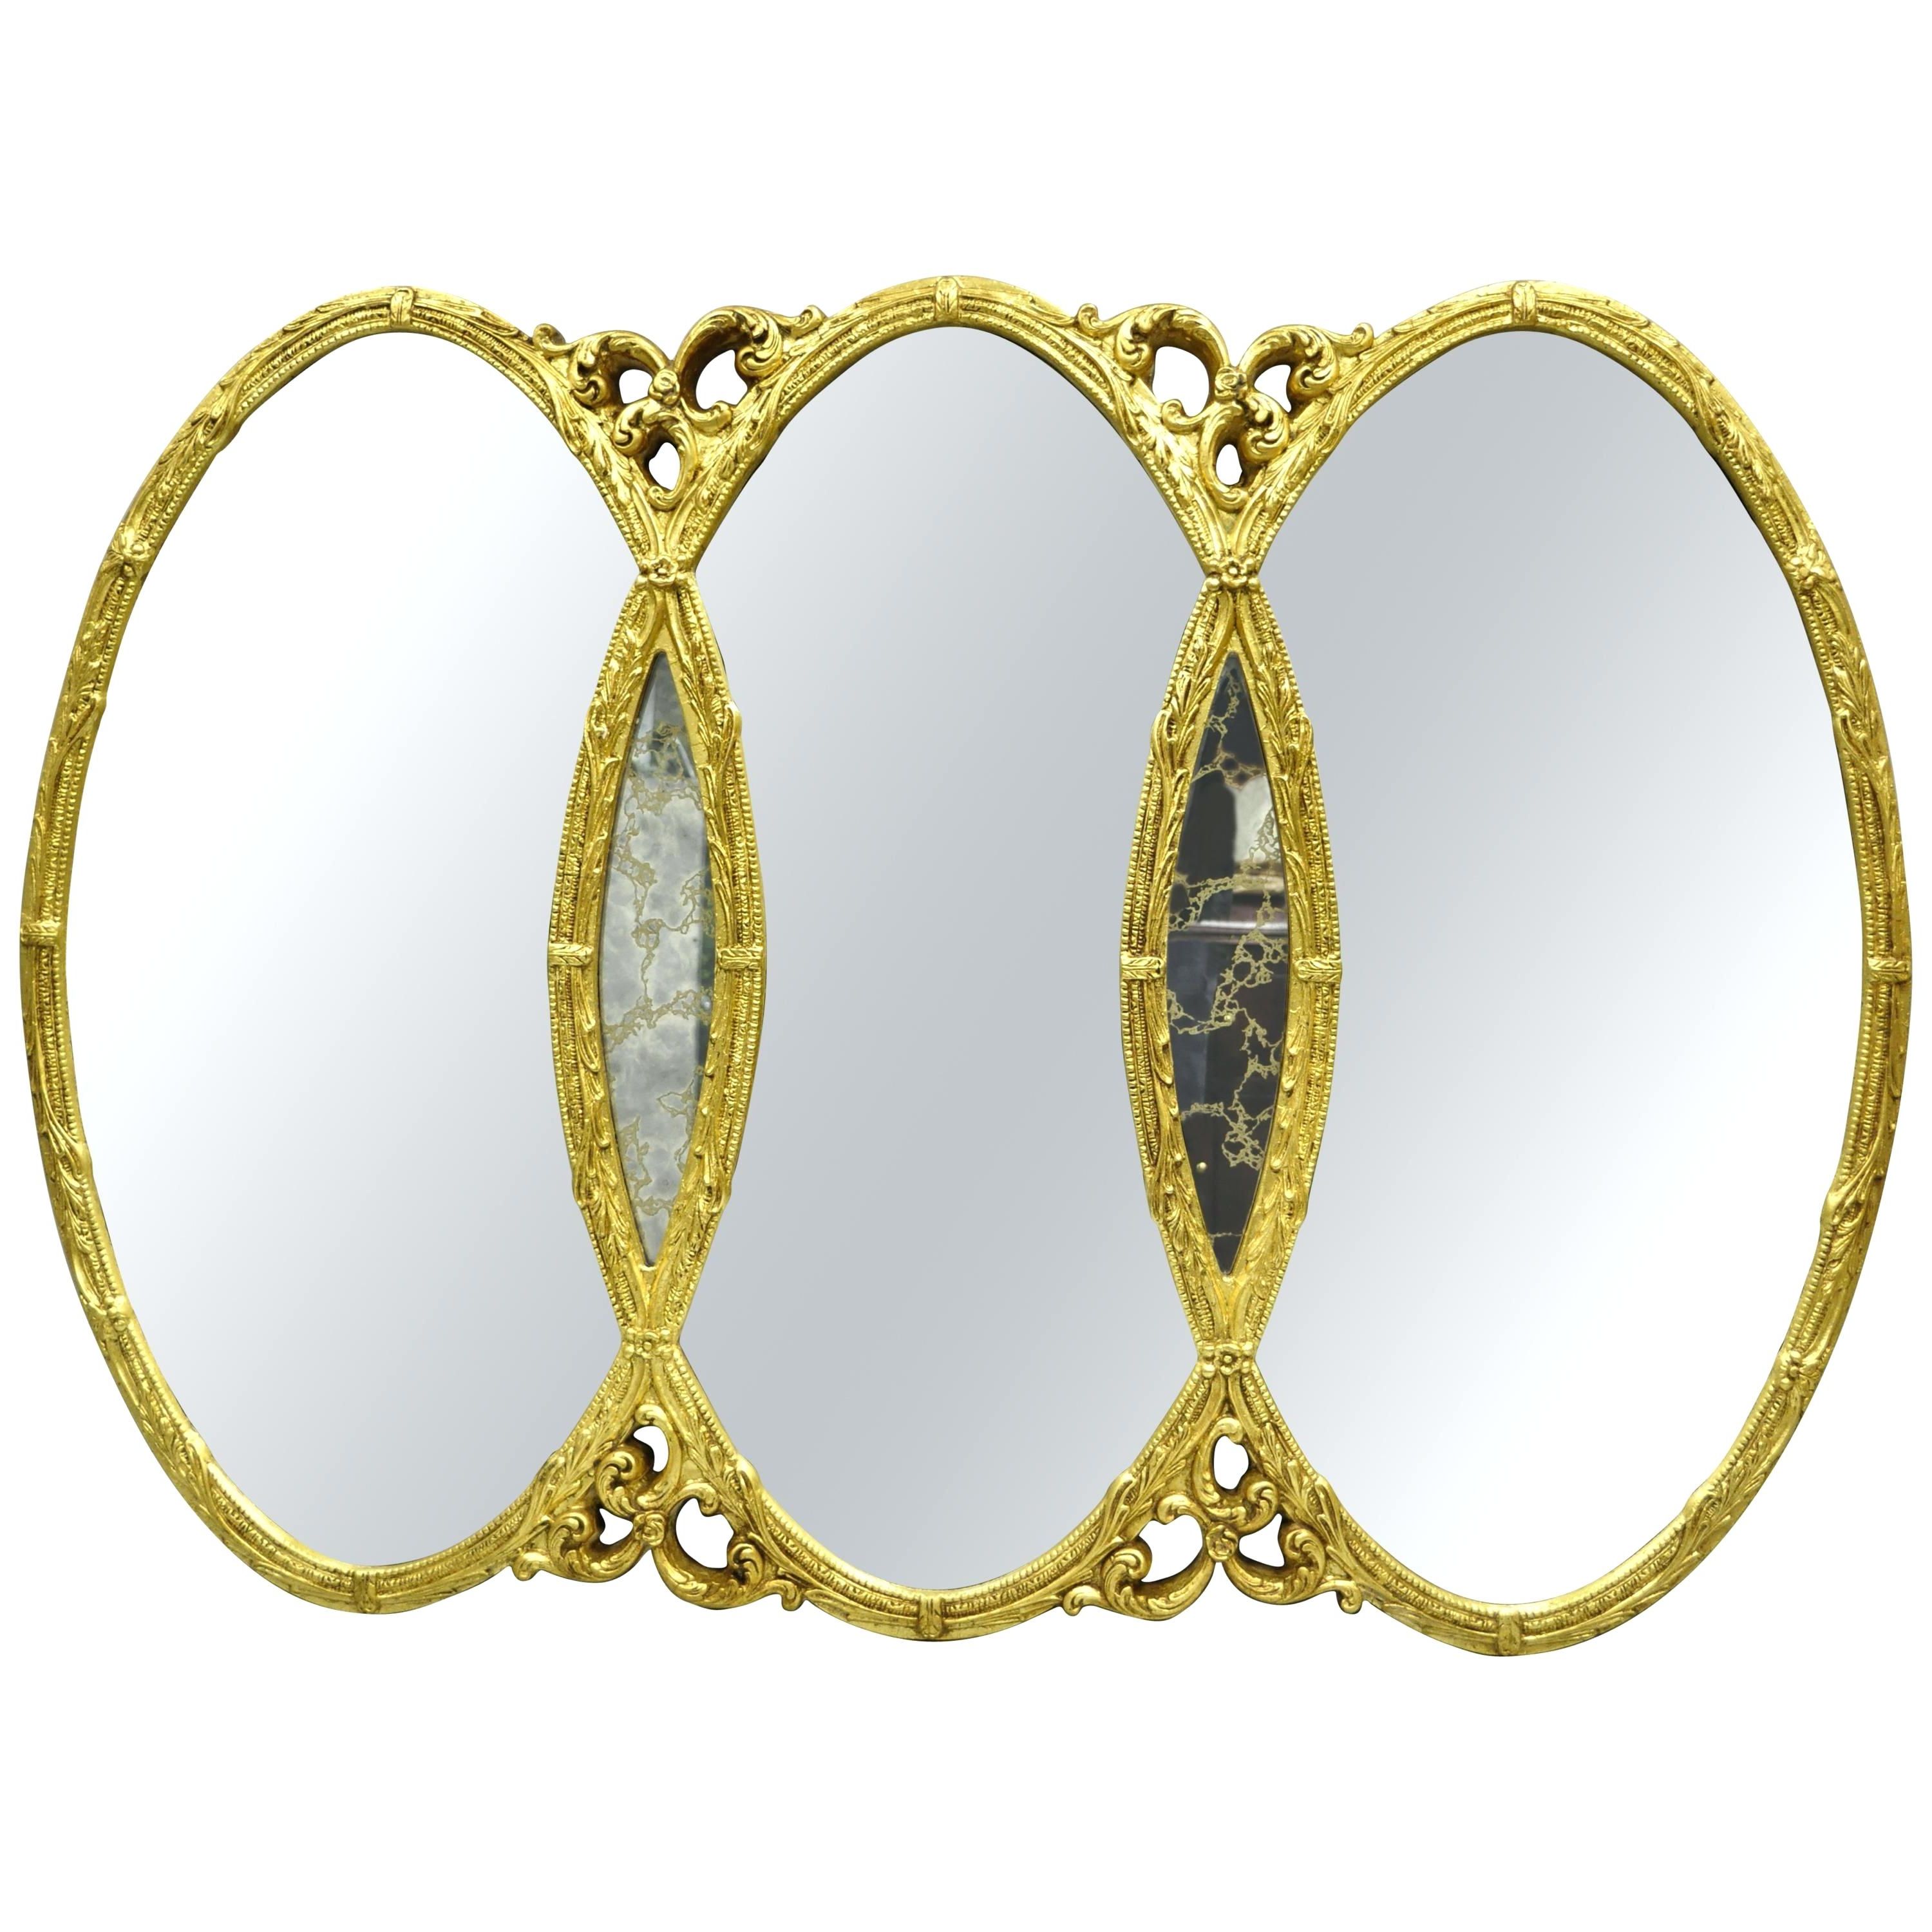 Oval Wall Mirrors Gold French Regency Triptych Triple Within Most Current Ikea Oval Wall Mirrors (View 17 of 20)